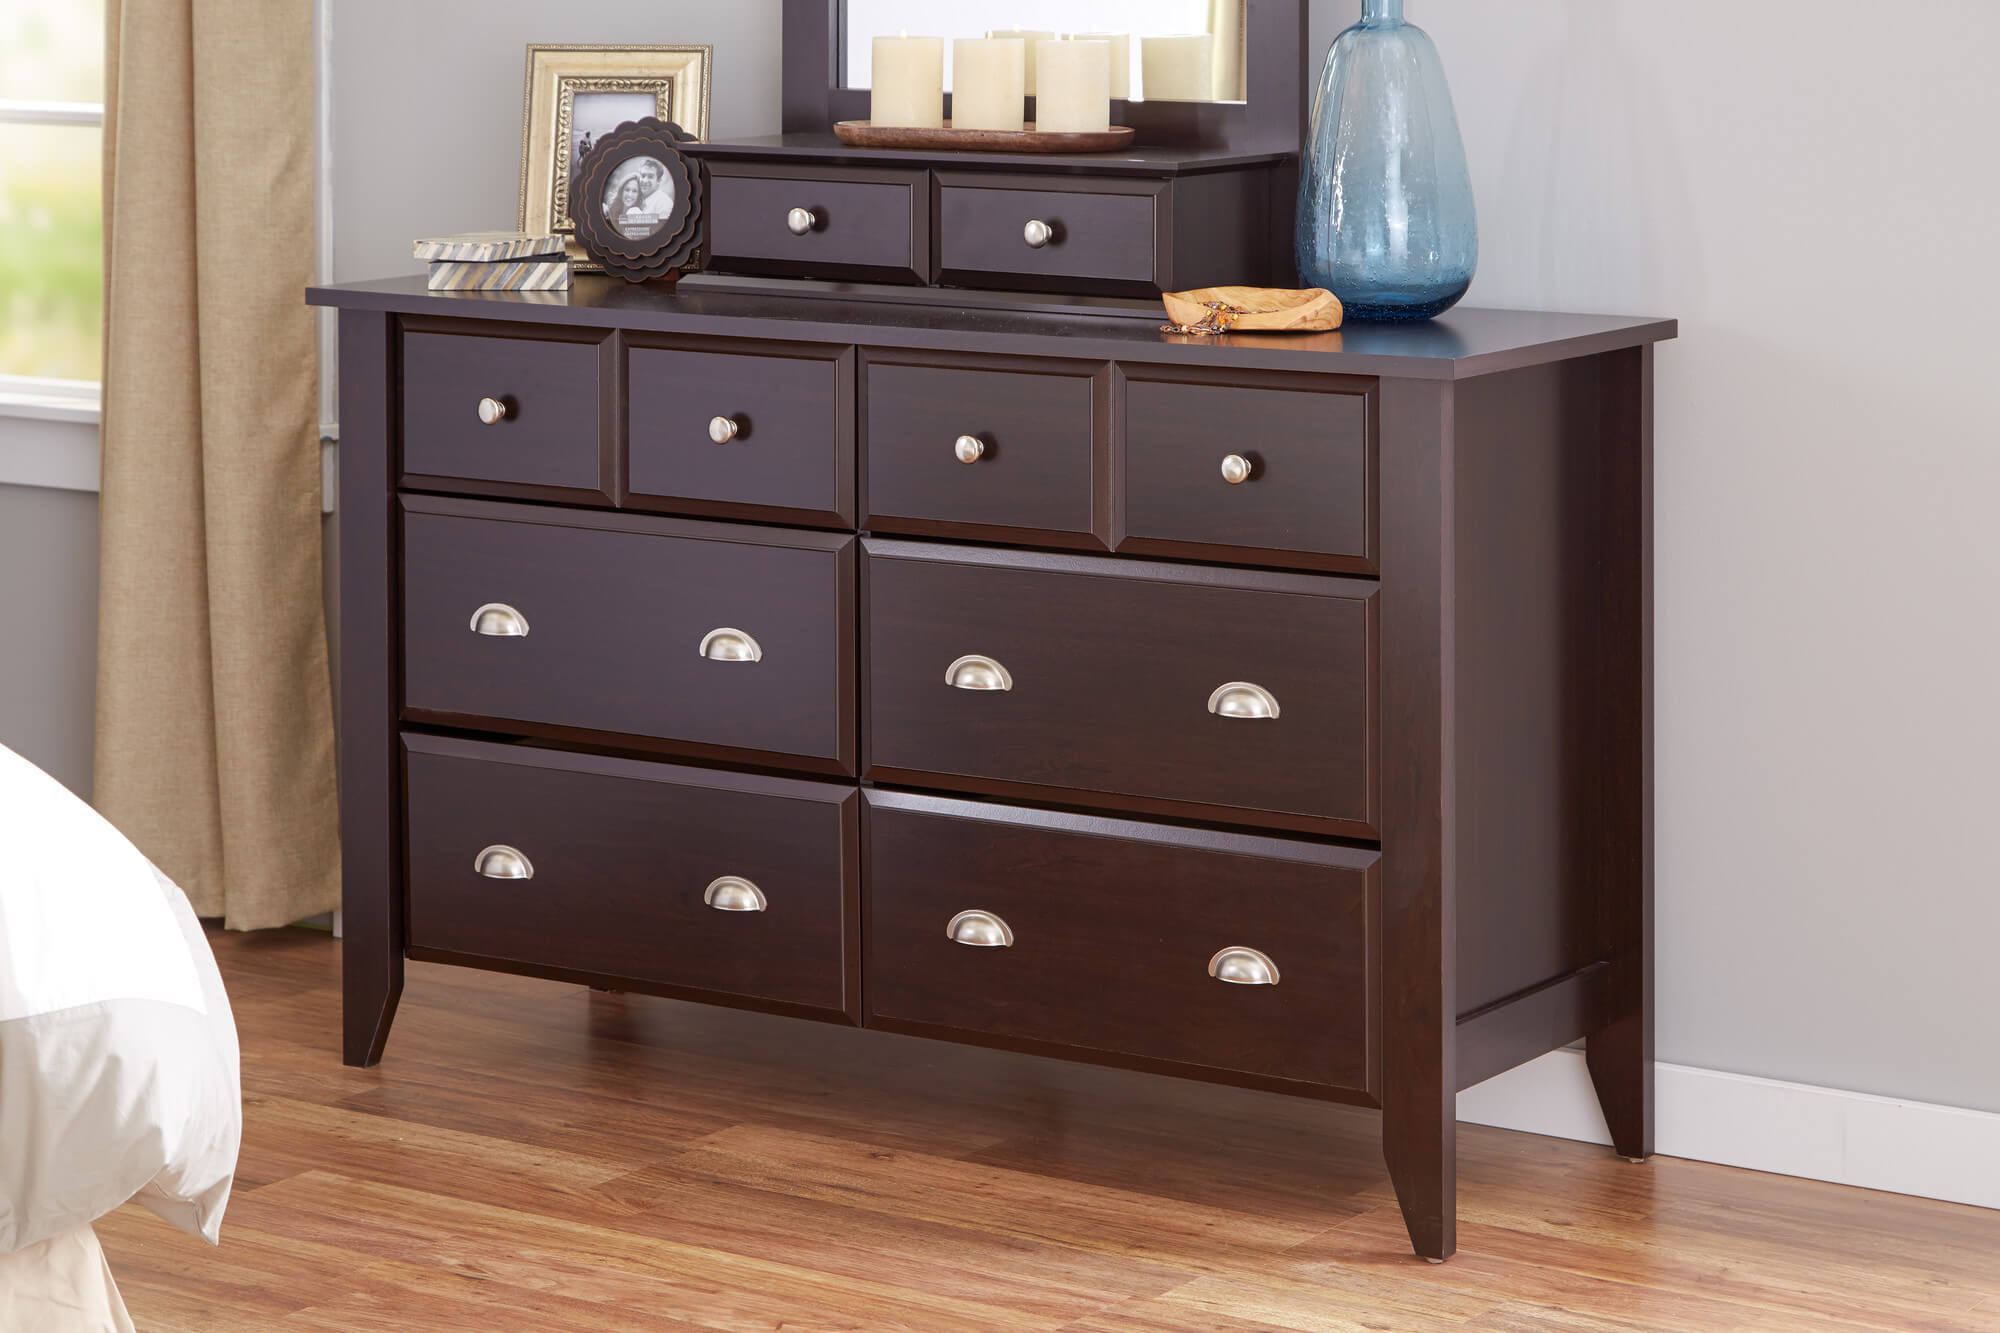 The standard dresser design came from one of the oldest pieces of furniture  invented: the